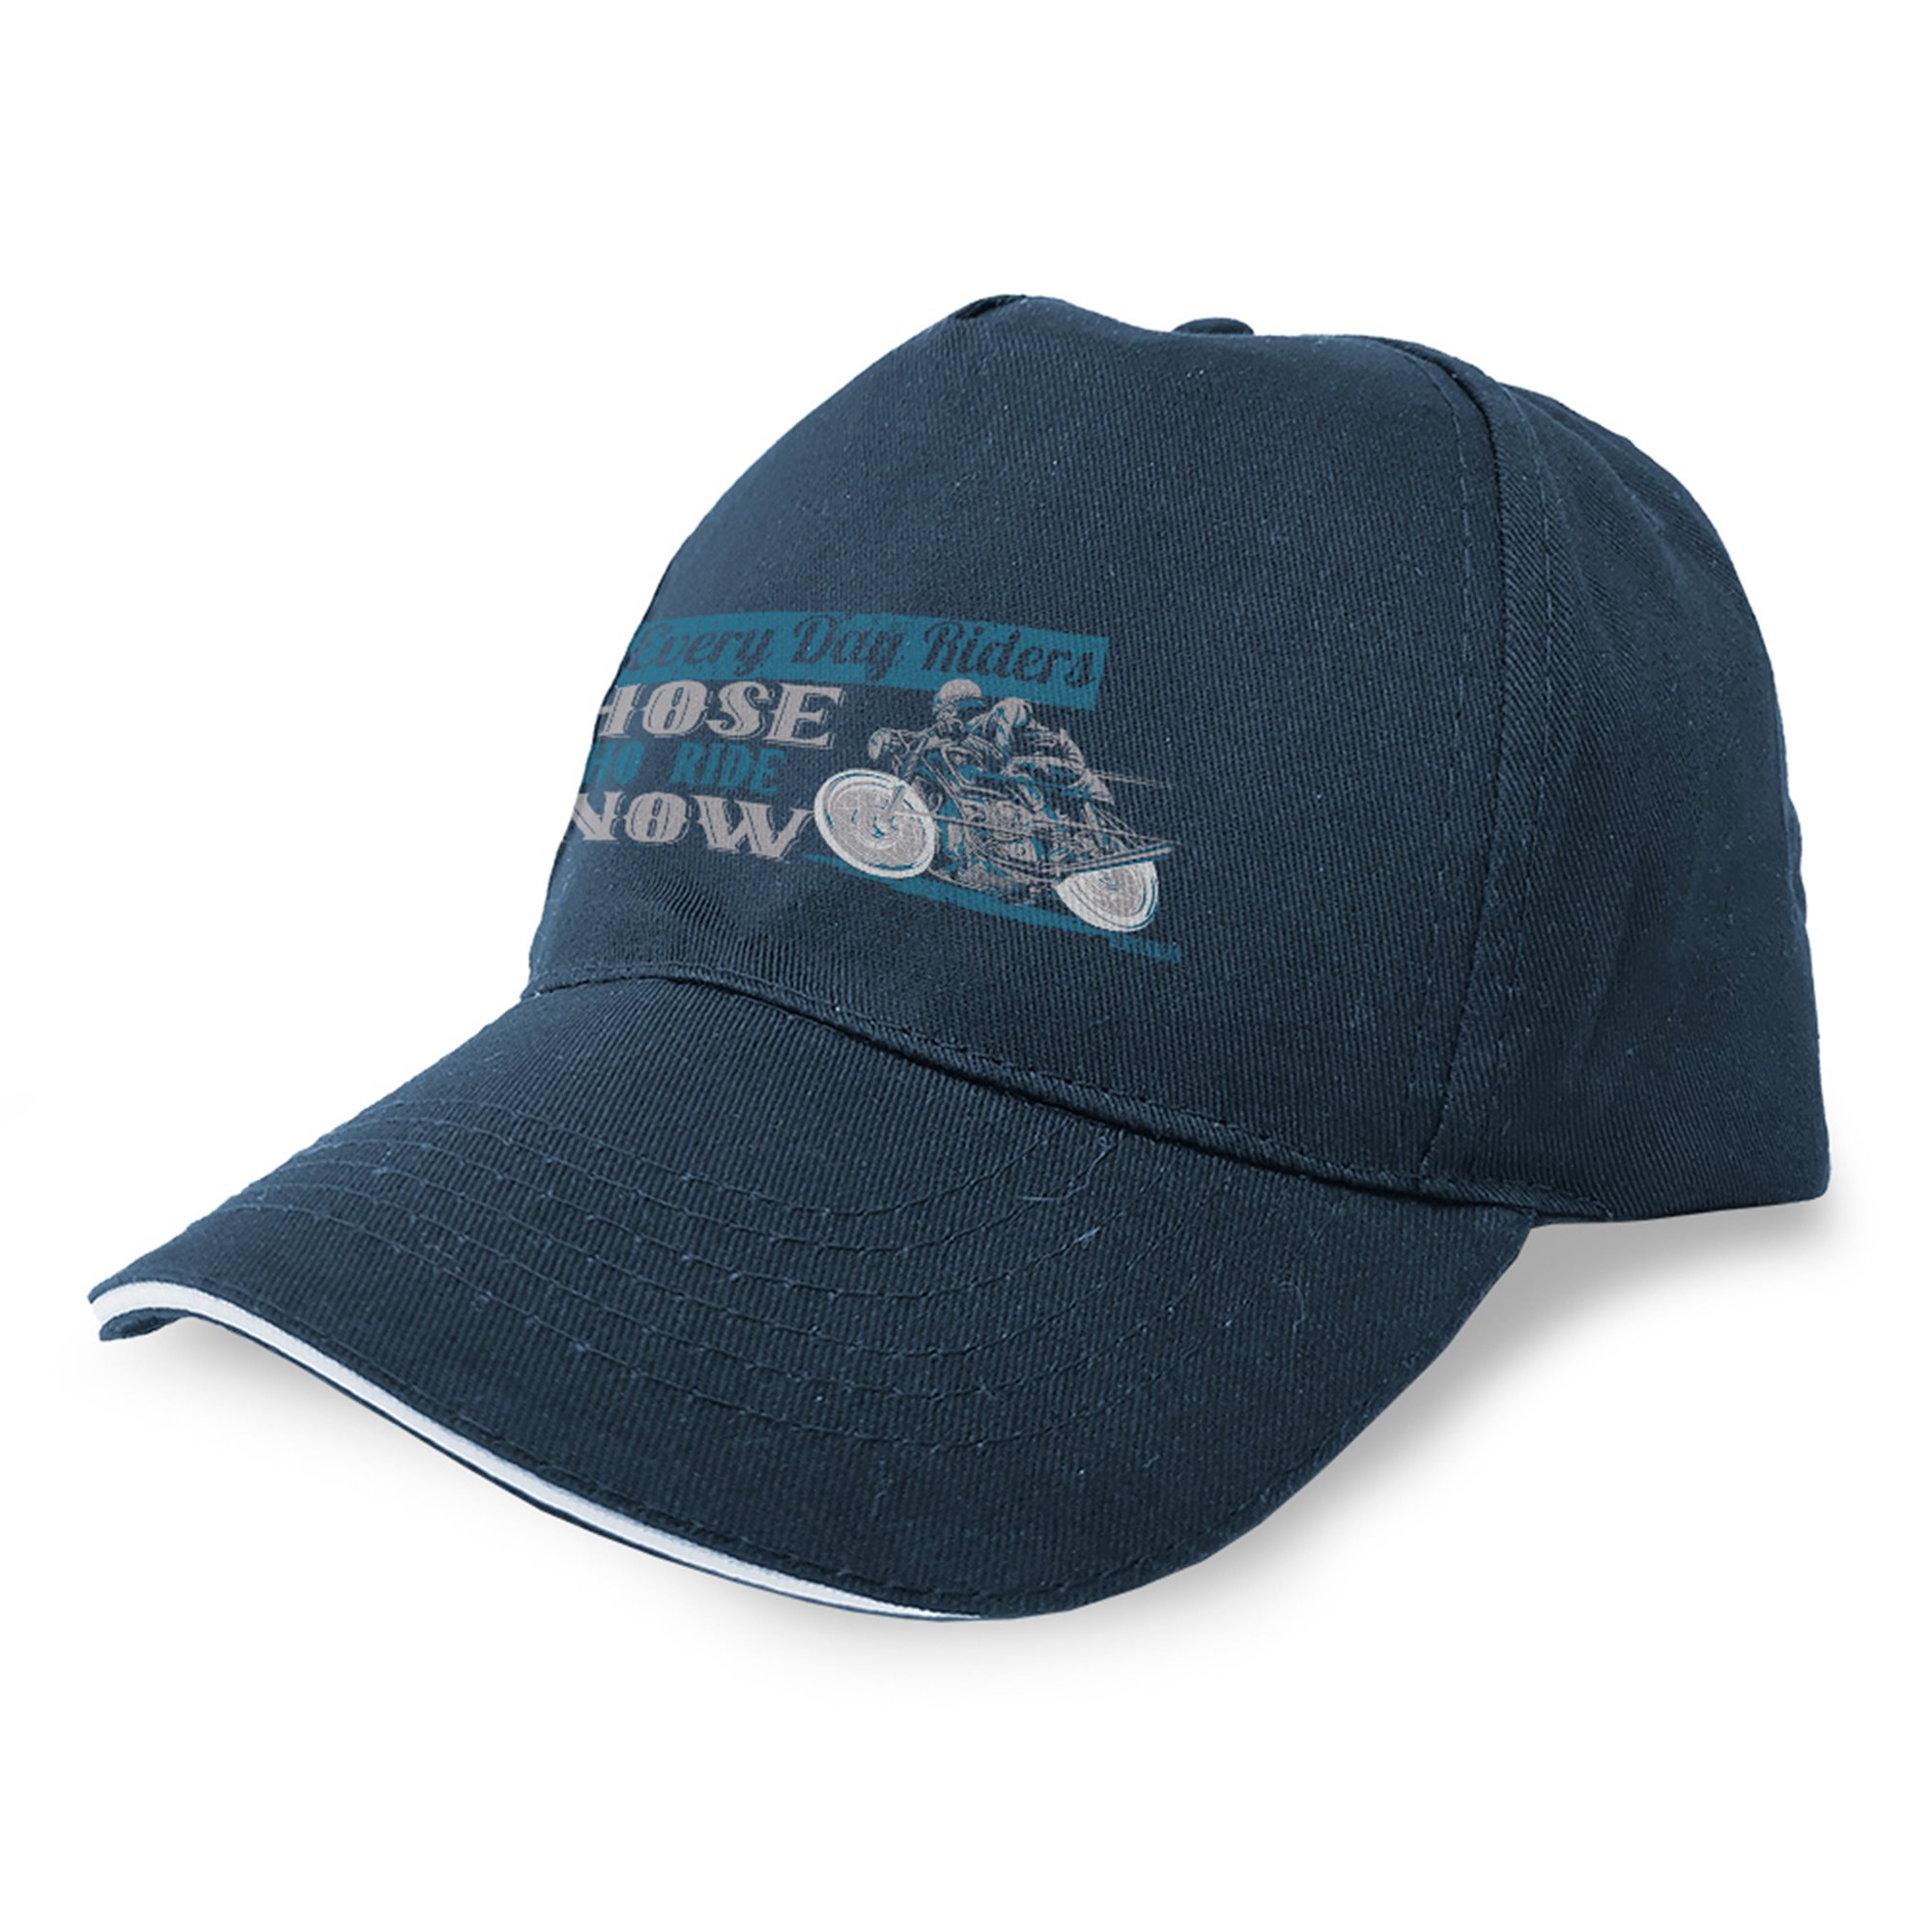 Cap Motorcycling Every Day Riders Unisex